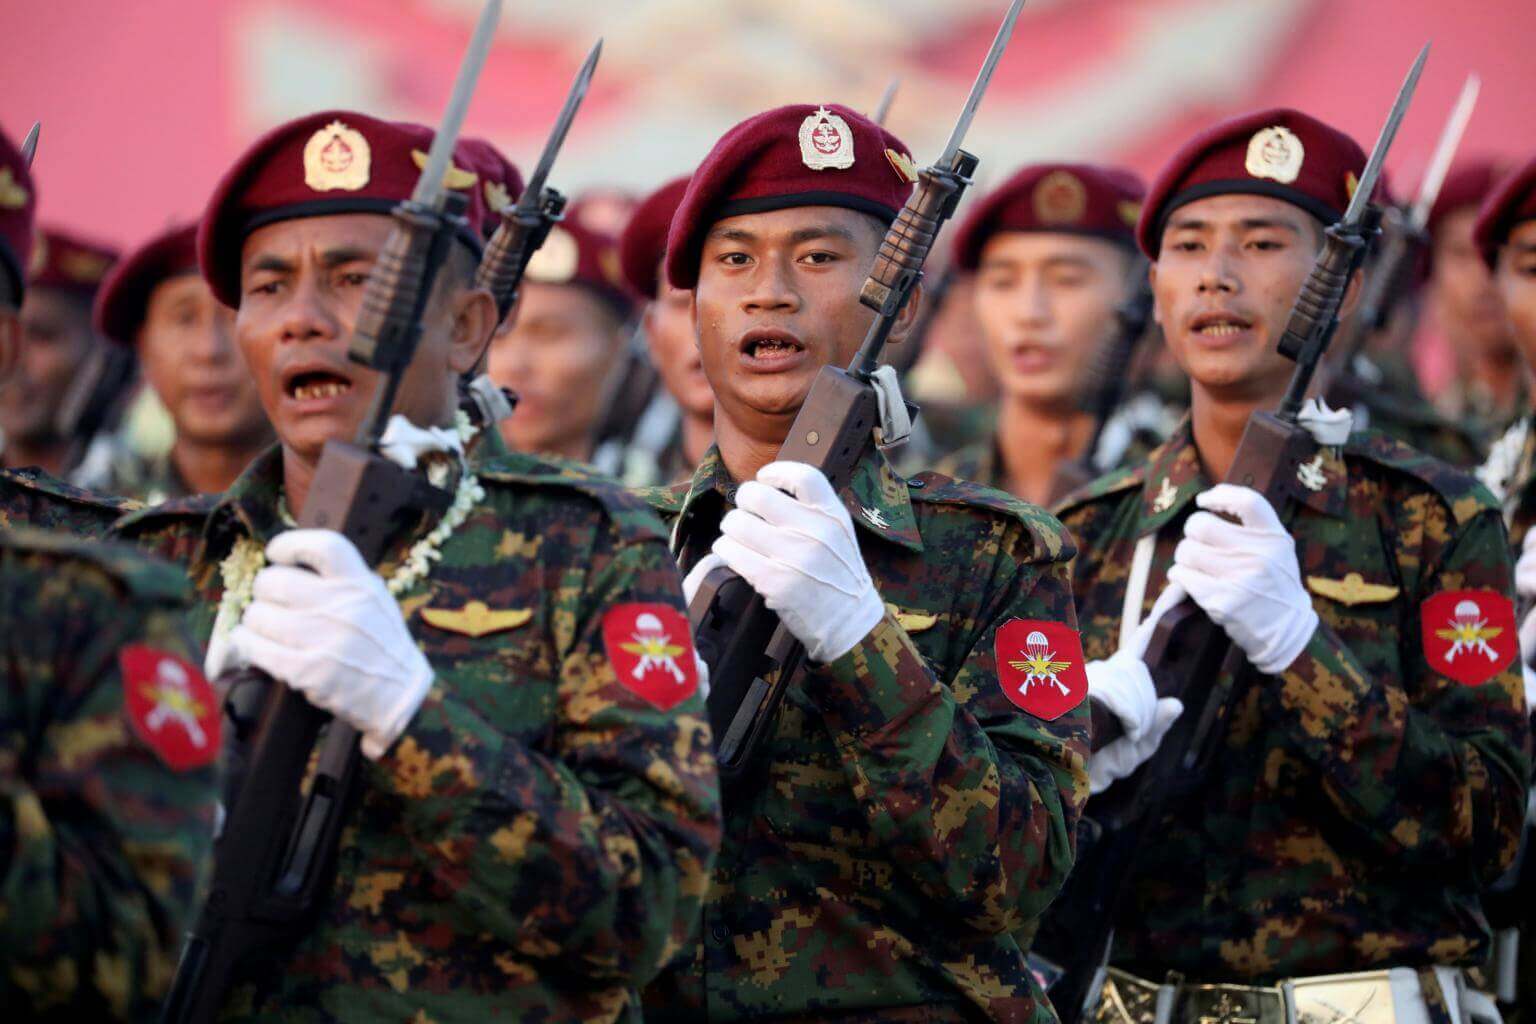 Australia Considers Scrapping Defence Partnership With Myanmar Military Following Coup